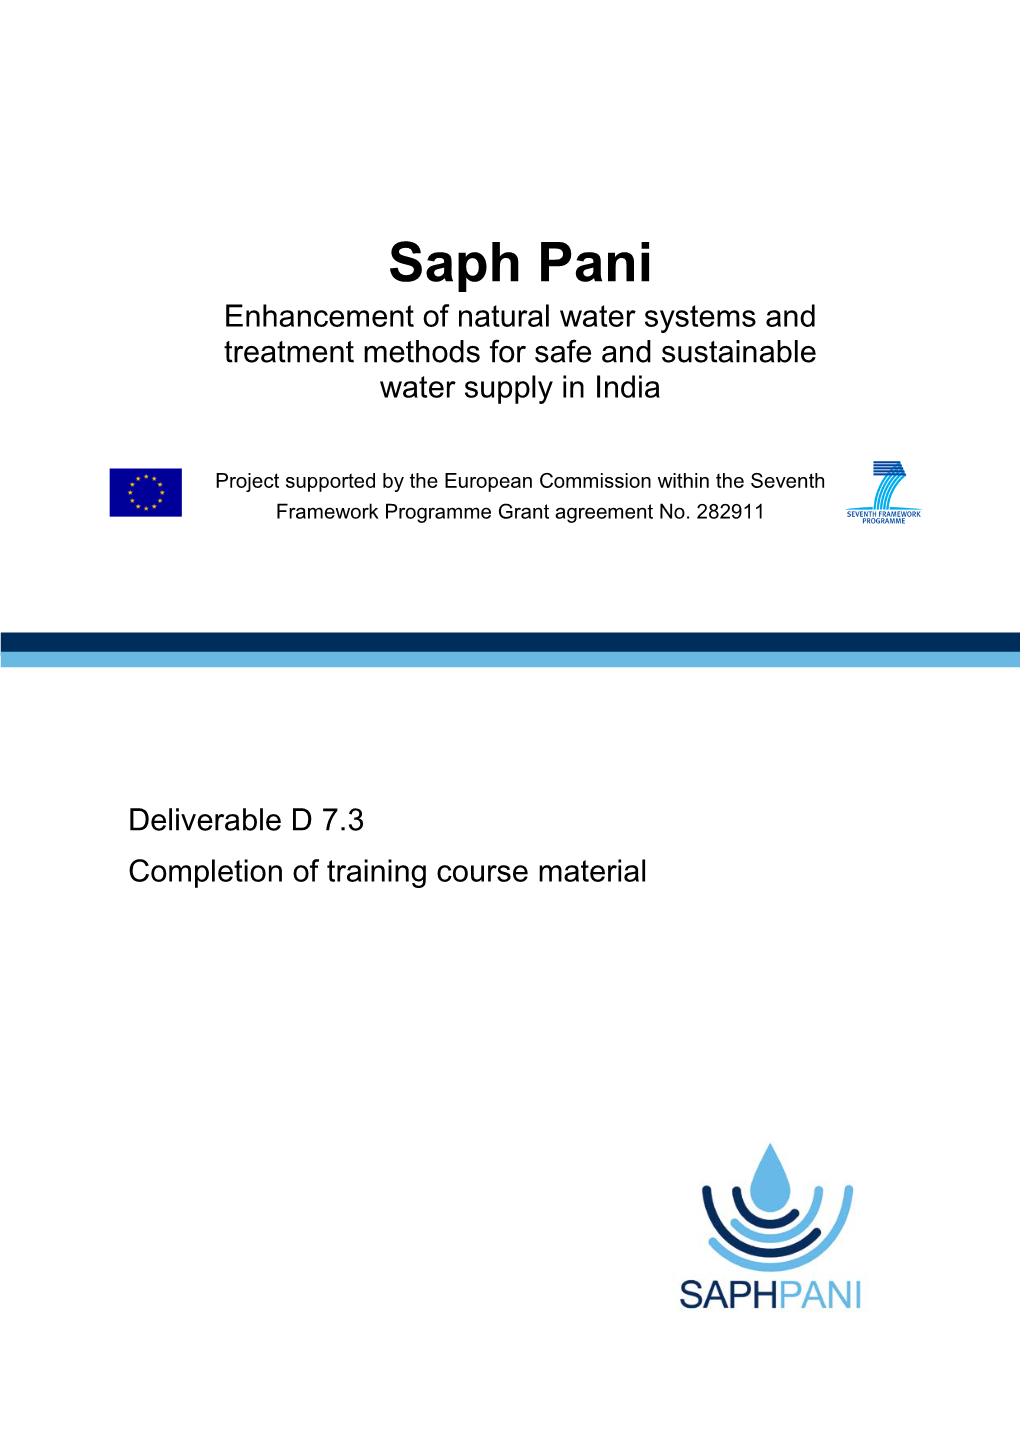 Saph Pani Enhancement of Natural Water Systems and Treatment Methods for Safe and Sustainable Water Supply in India